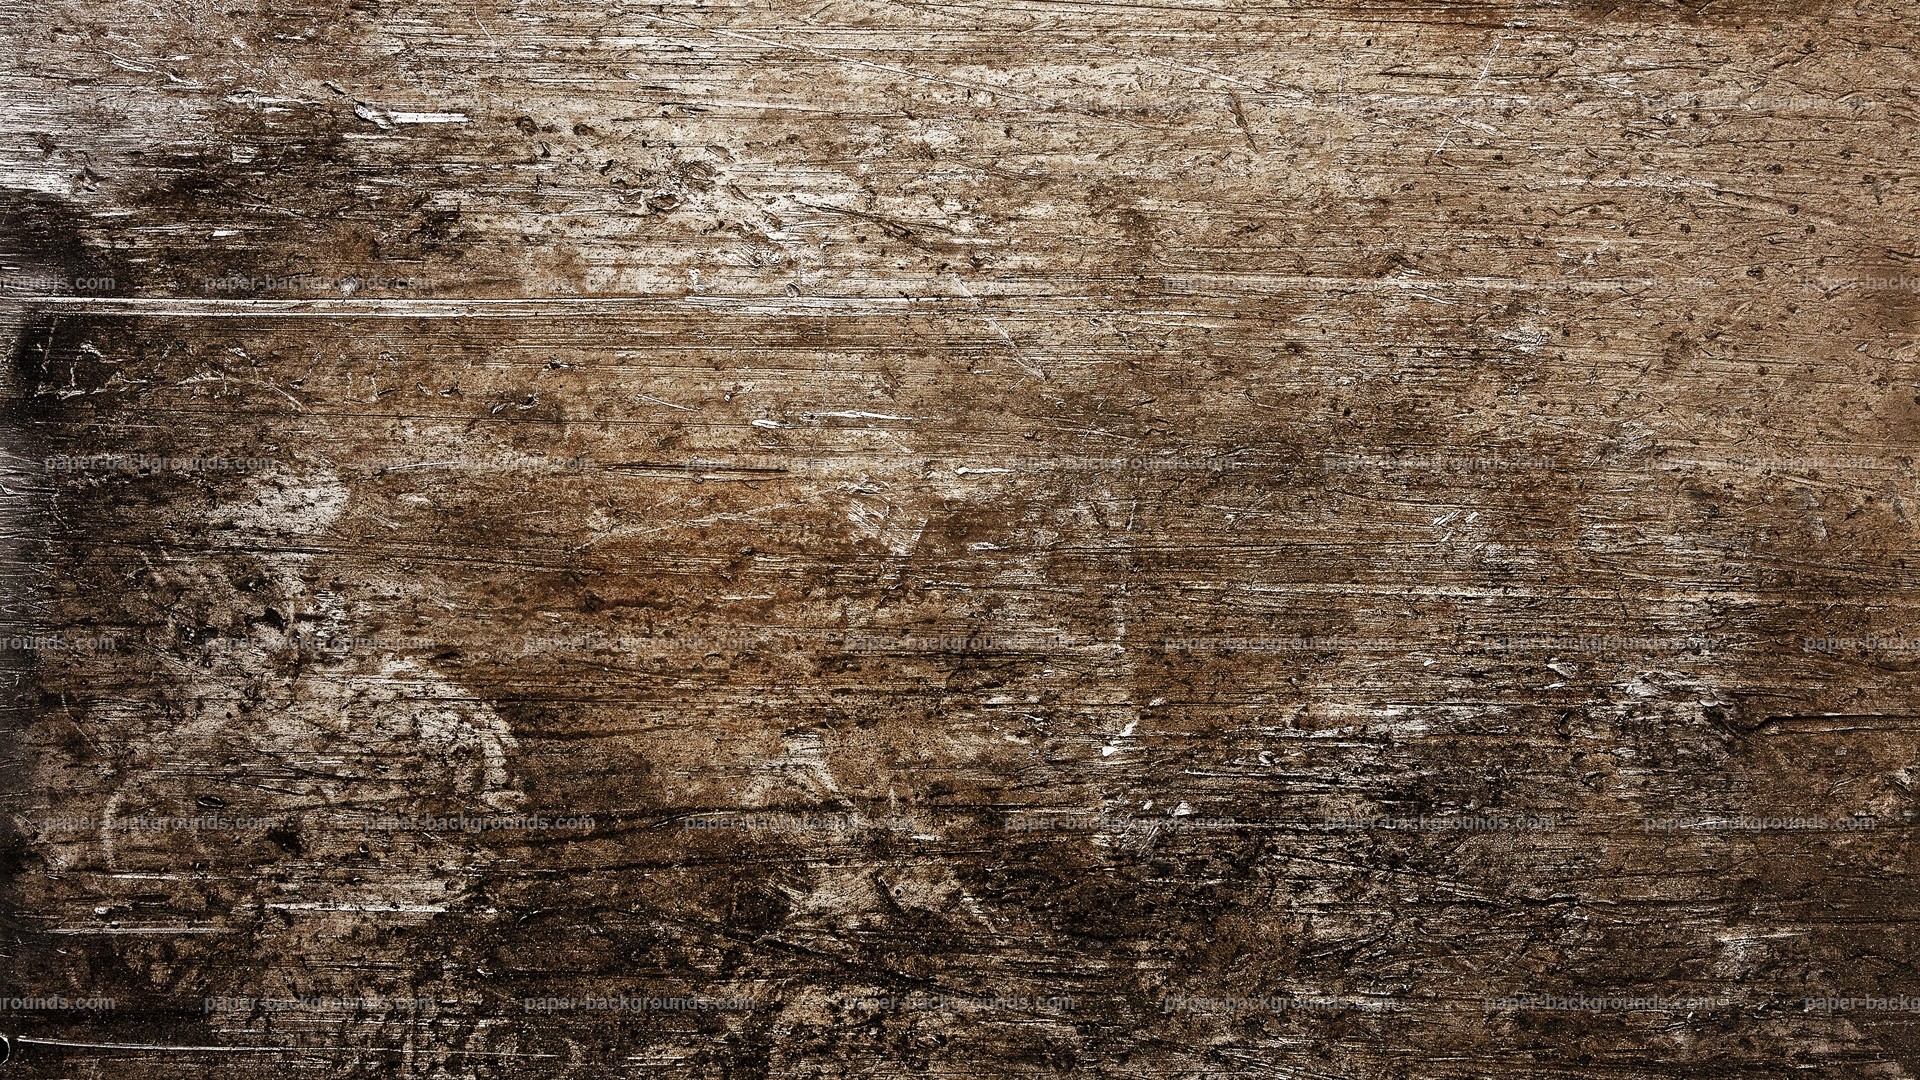 1920x1080 Old-Grunge-Rusty-Scratched-Metal-Texture-Hd Â« Paper Backgrounds